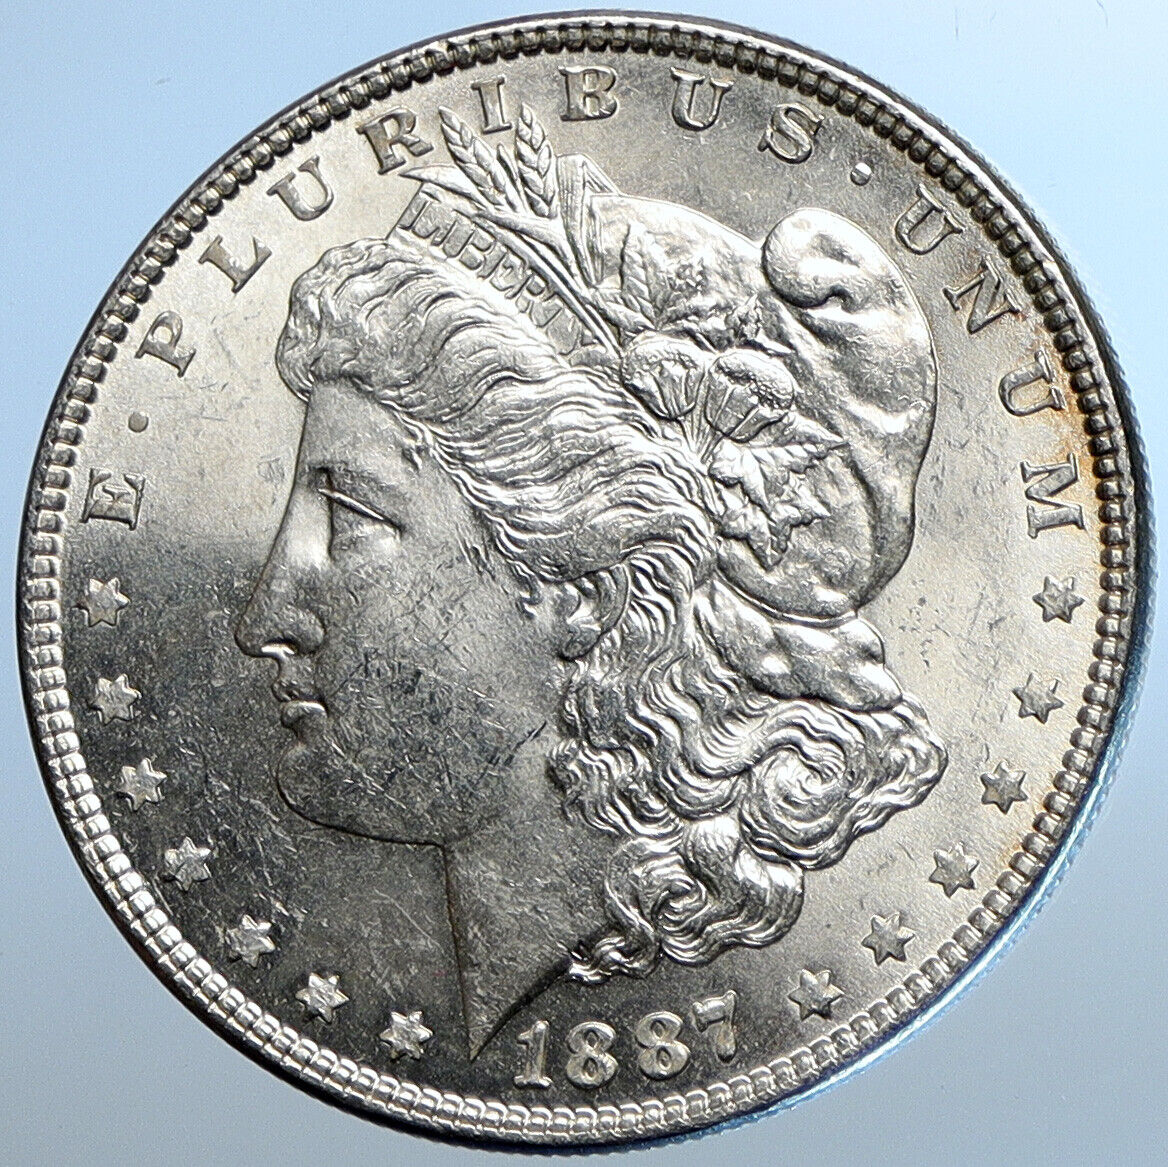 1887 P UNITED STATES of America SILVER Morgan OLD US Dollar Coin EAGLE i108528